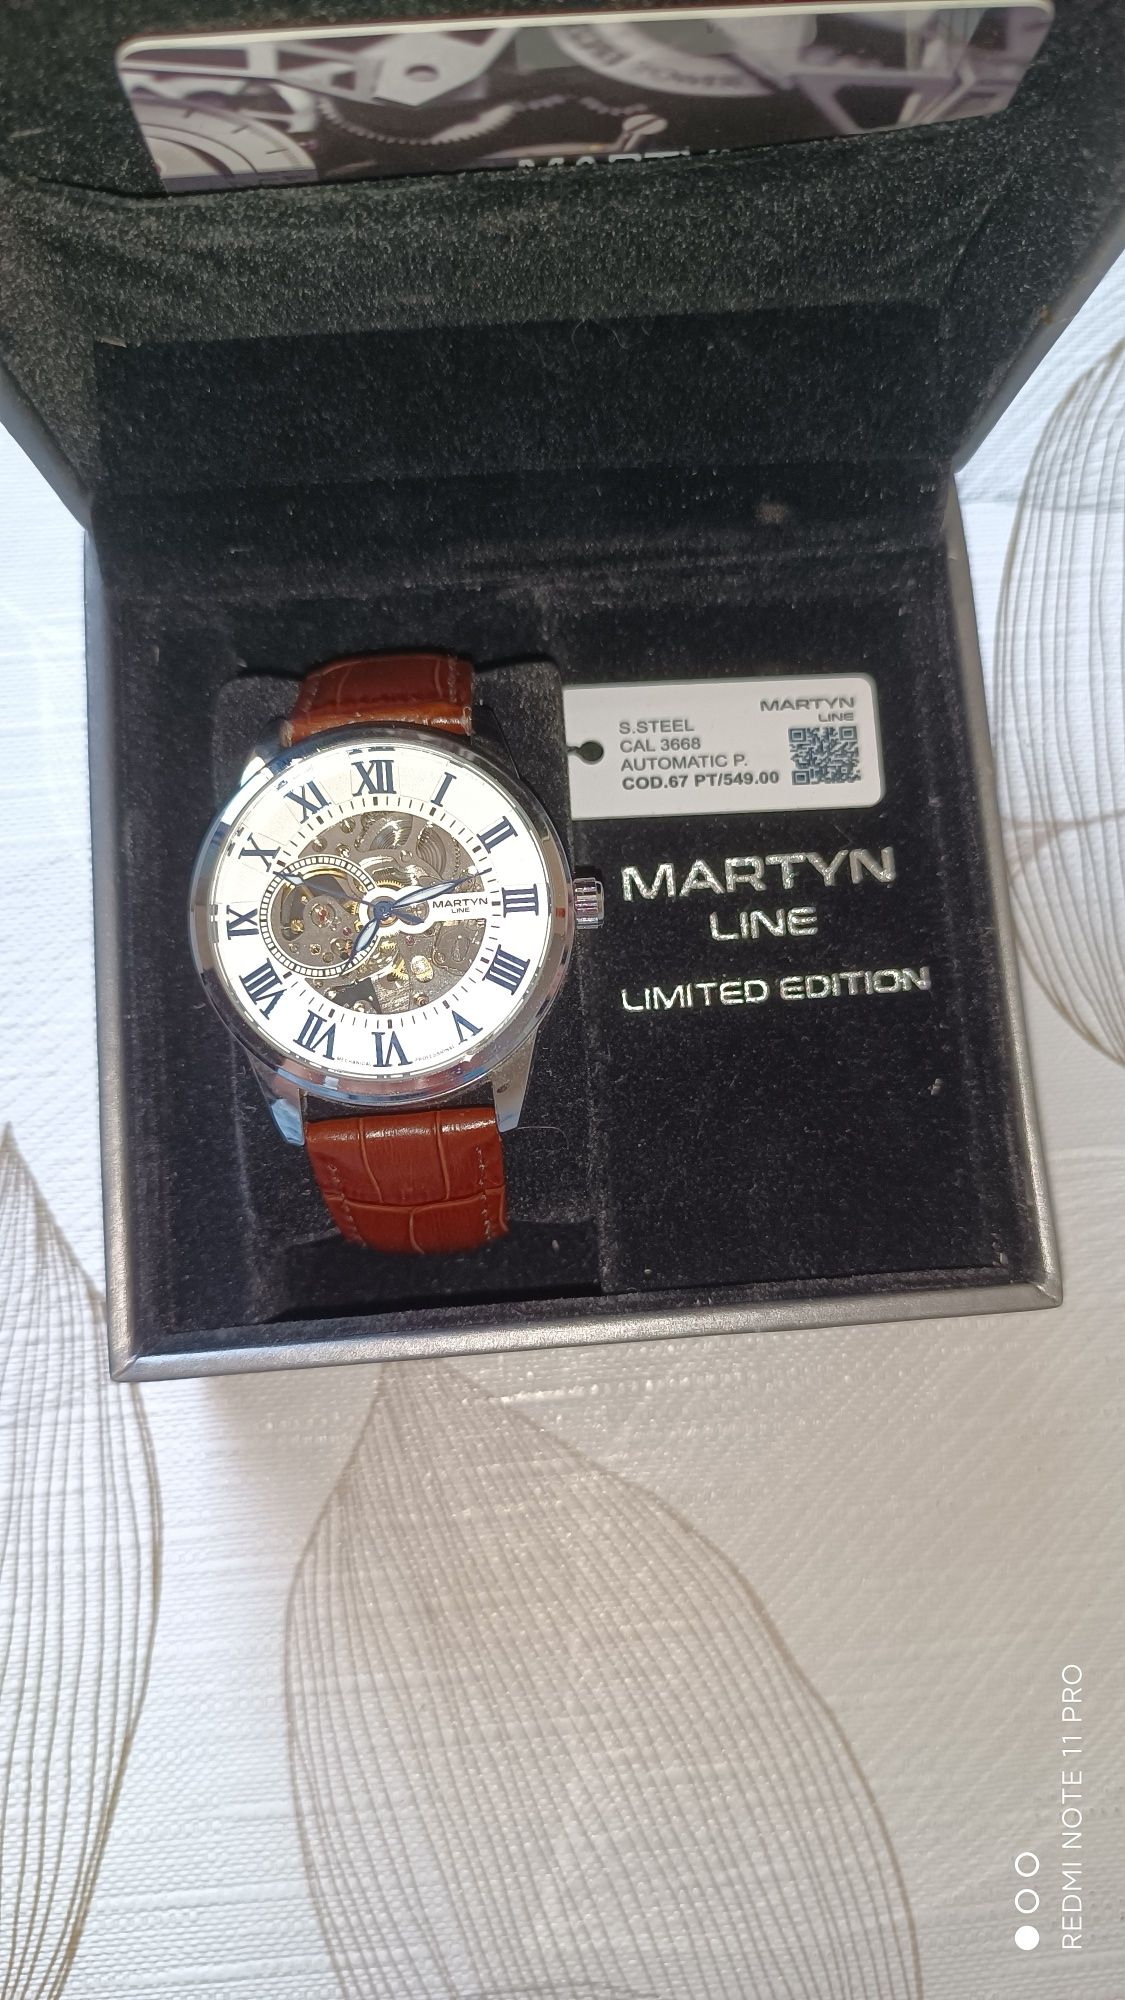 СПЕШНО --> Martyn Line > Automatic - Limited edition